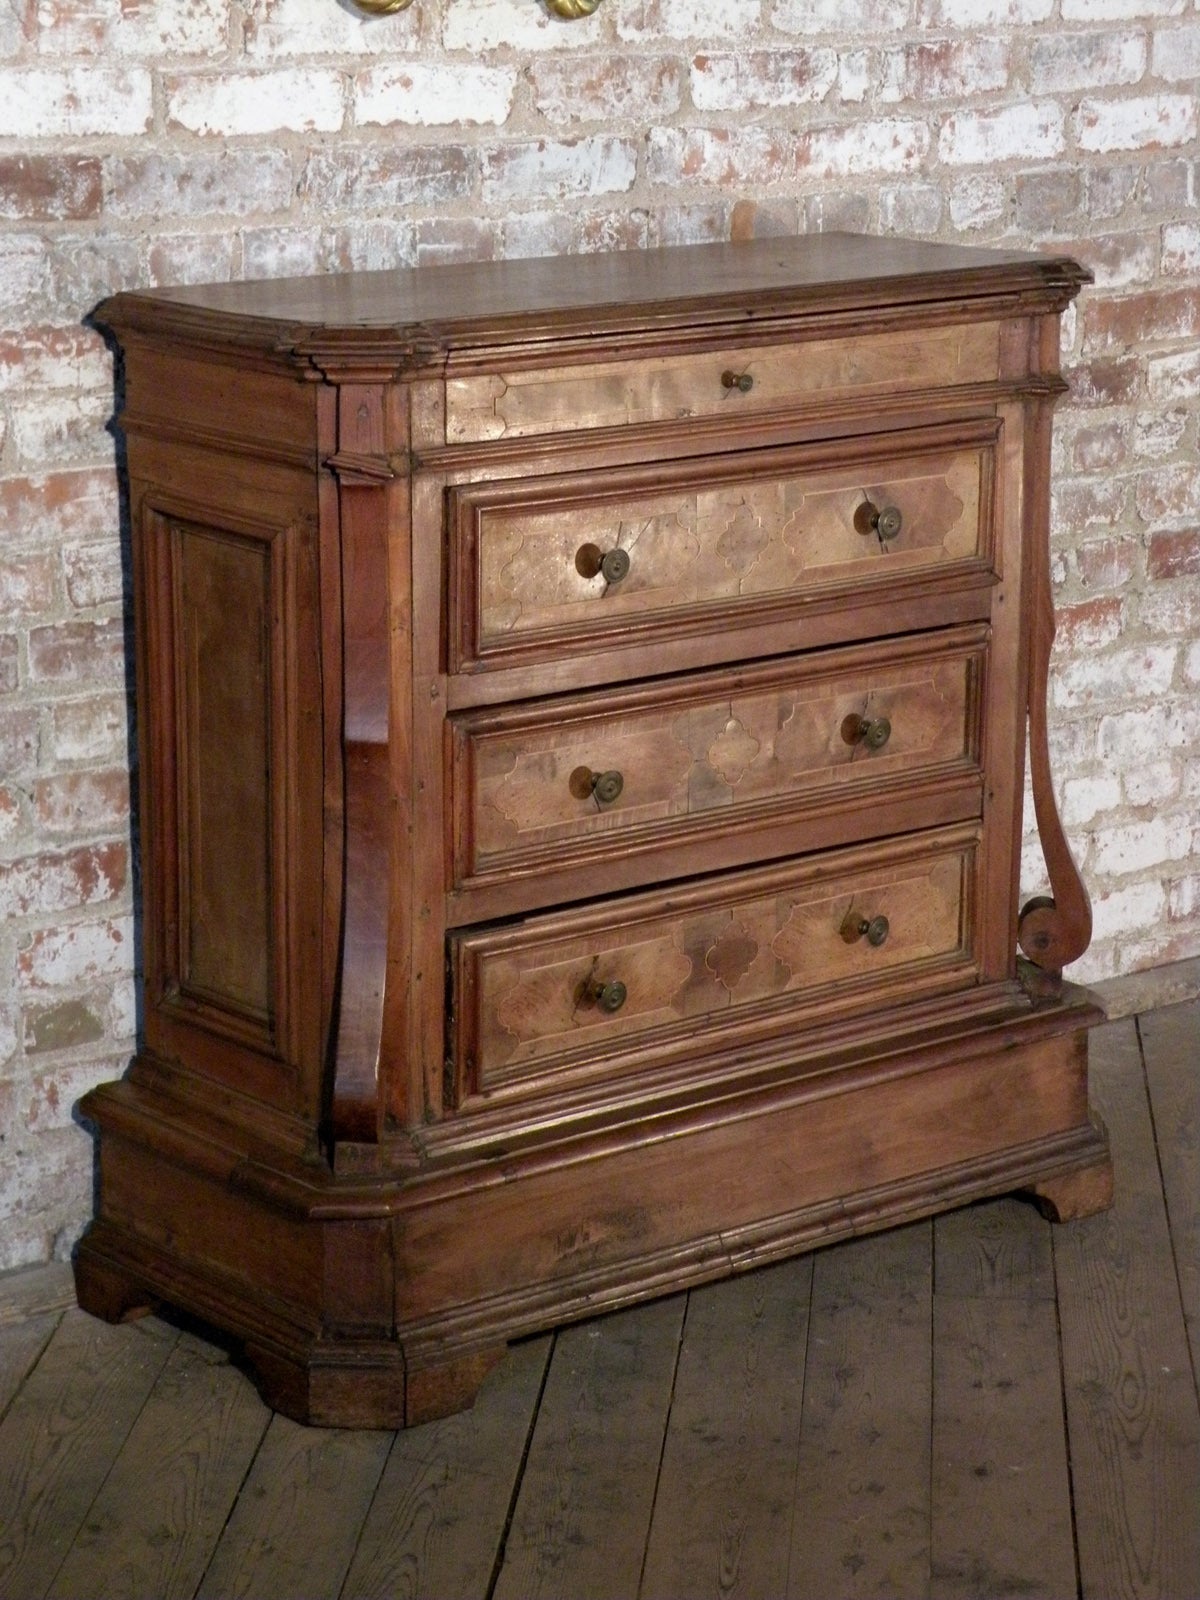 Unusual Commode of Medium Size, made of Walnut and Walnut-veneer, embellished with Fruit Wood Inlay, canted corners with applied raised scroll-decoration, four drawers with molded front panels, conforming molded and inlaid side panels, raised on a